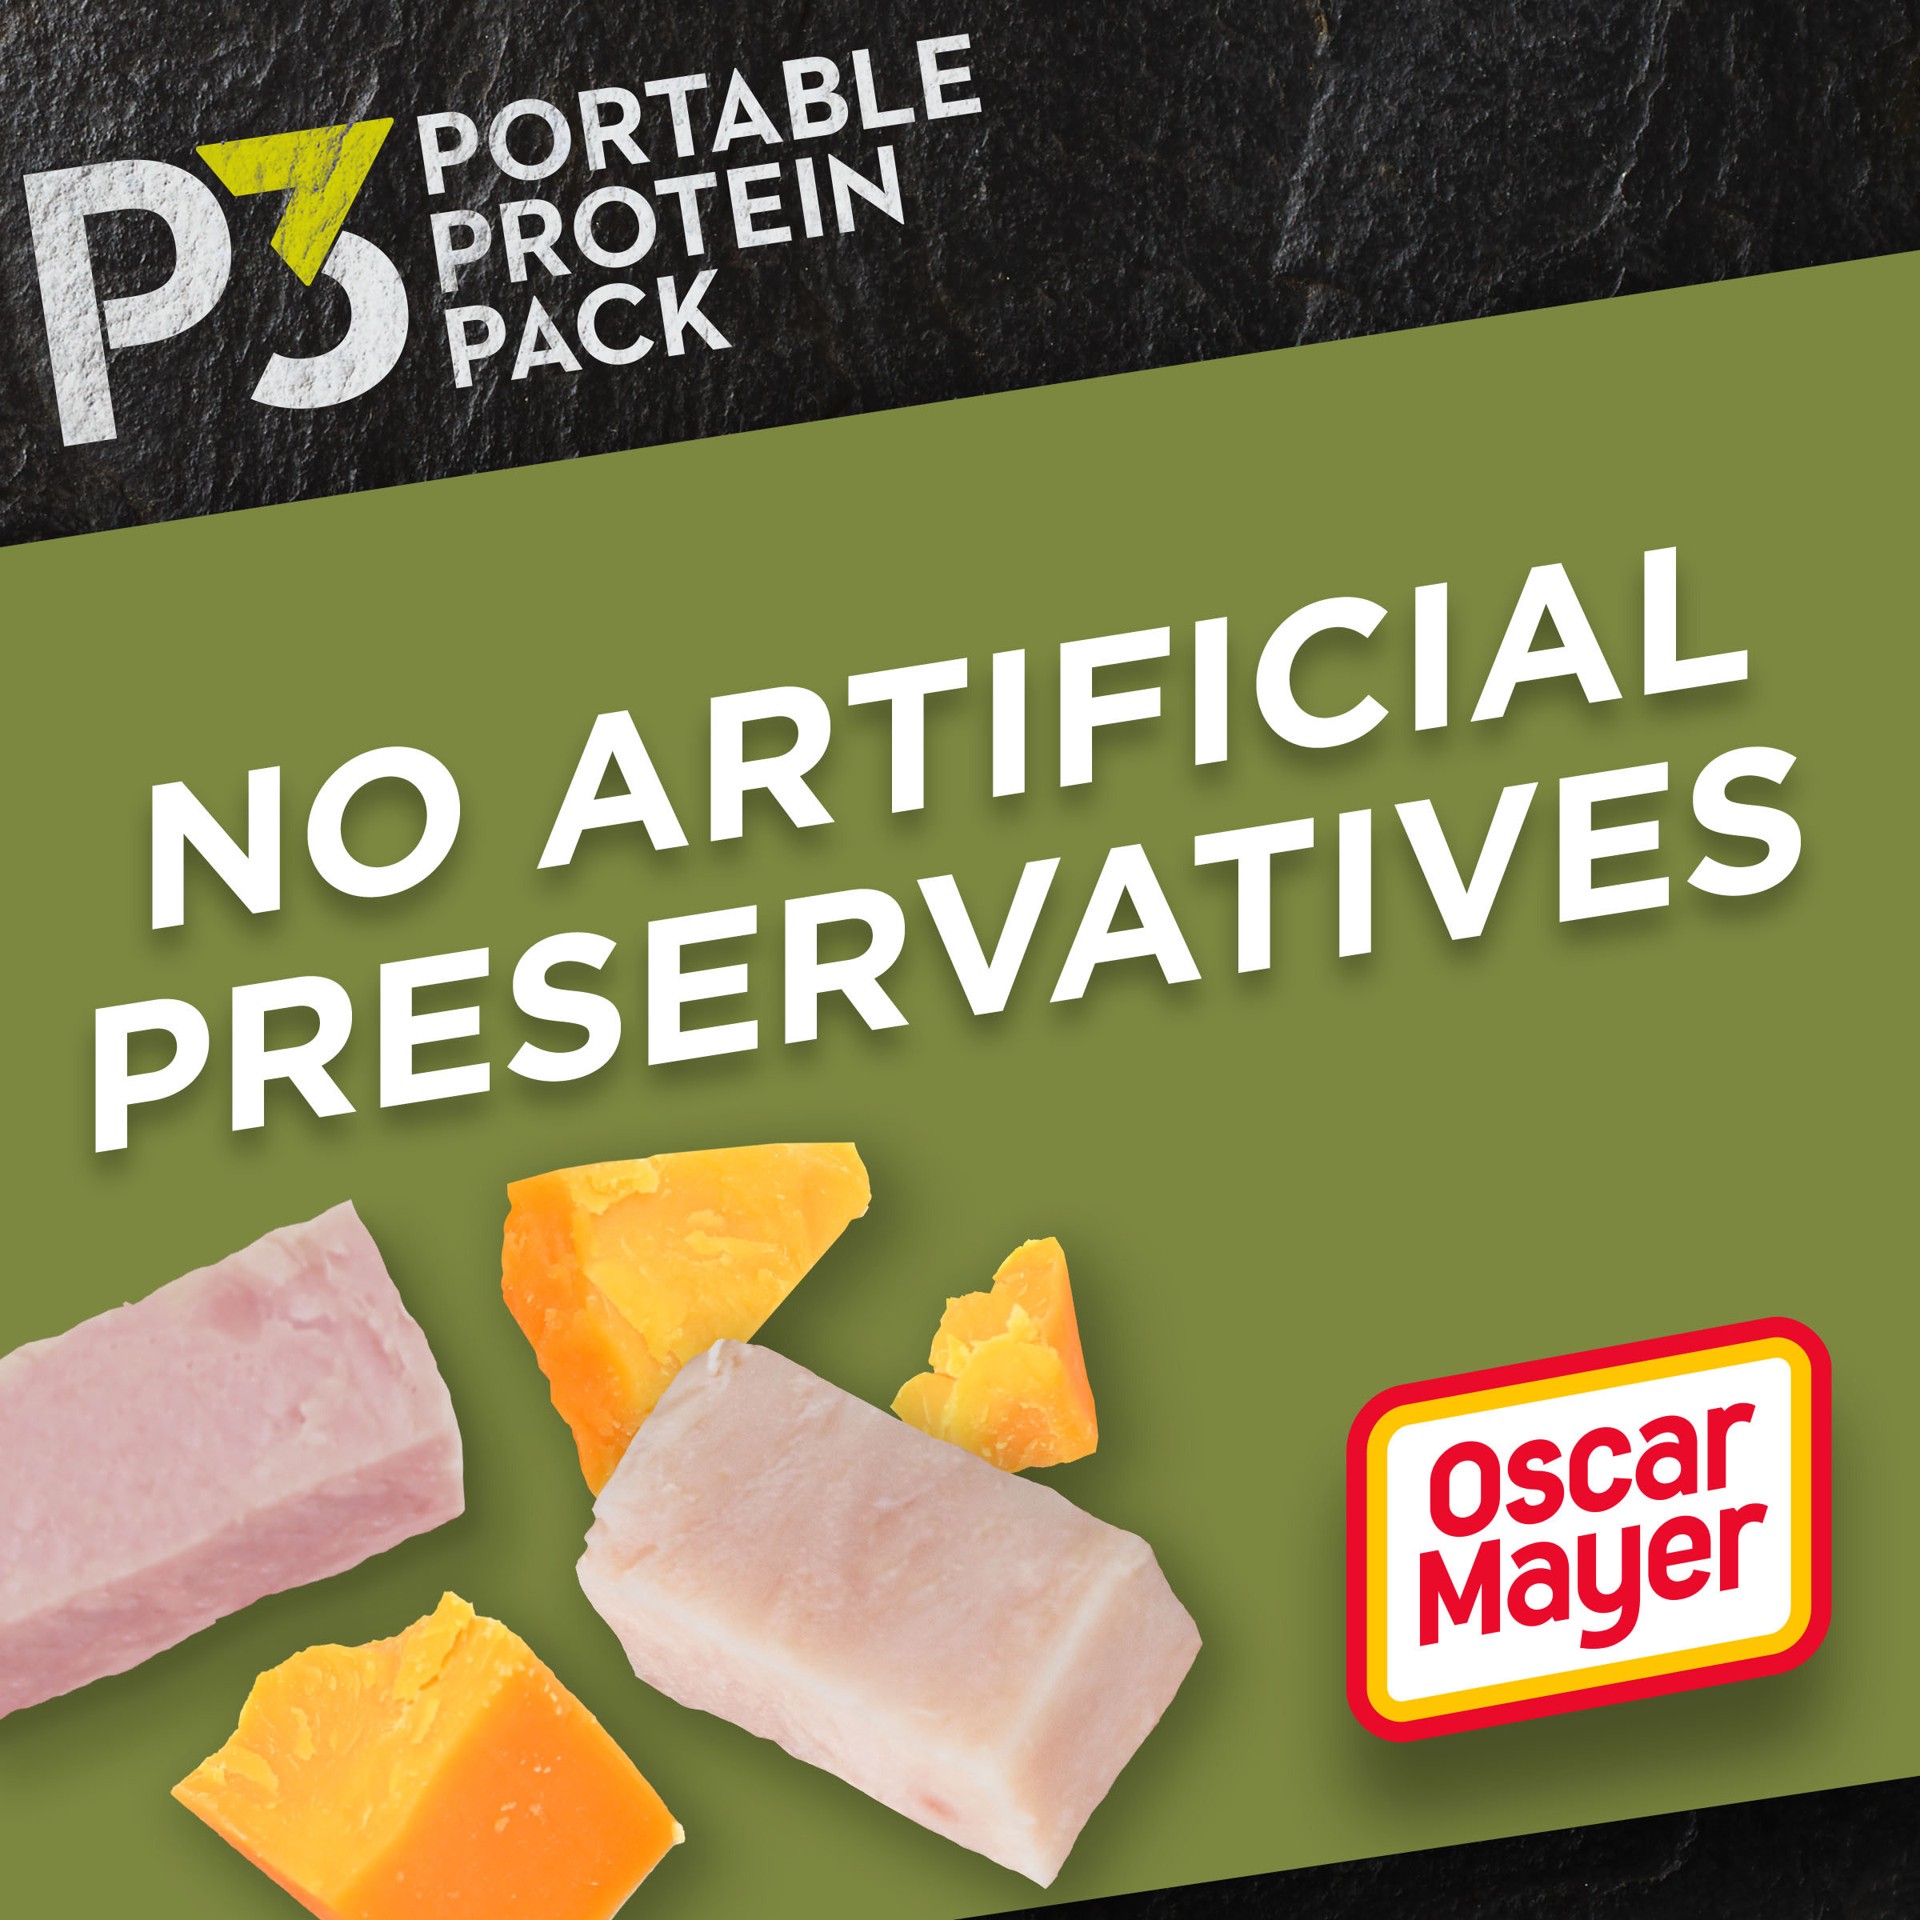 slide 5 of 5, P3 Portable Protein Snack Pack with Turkey, Ham & Cheddar Cheese, 2.3 oz Tray, 2.3 oz